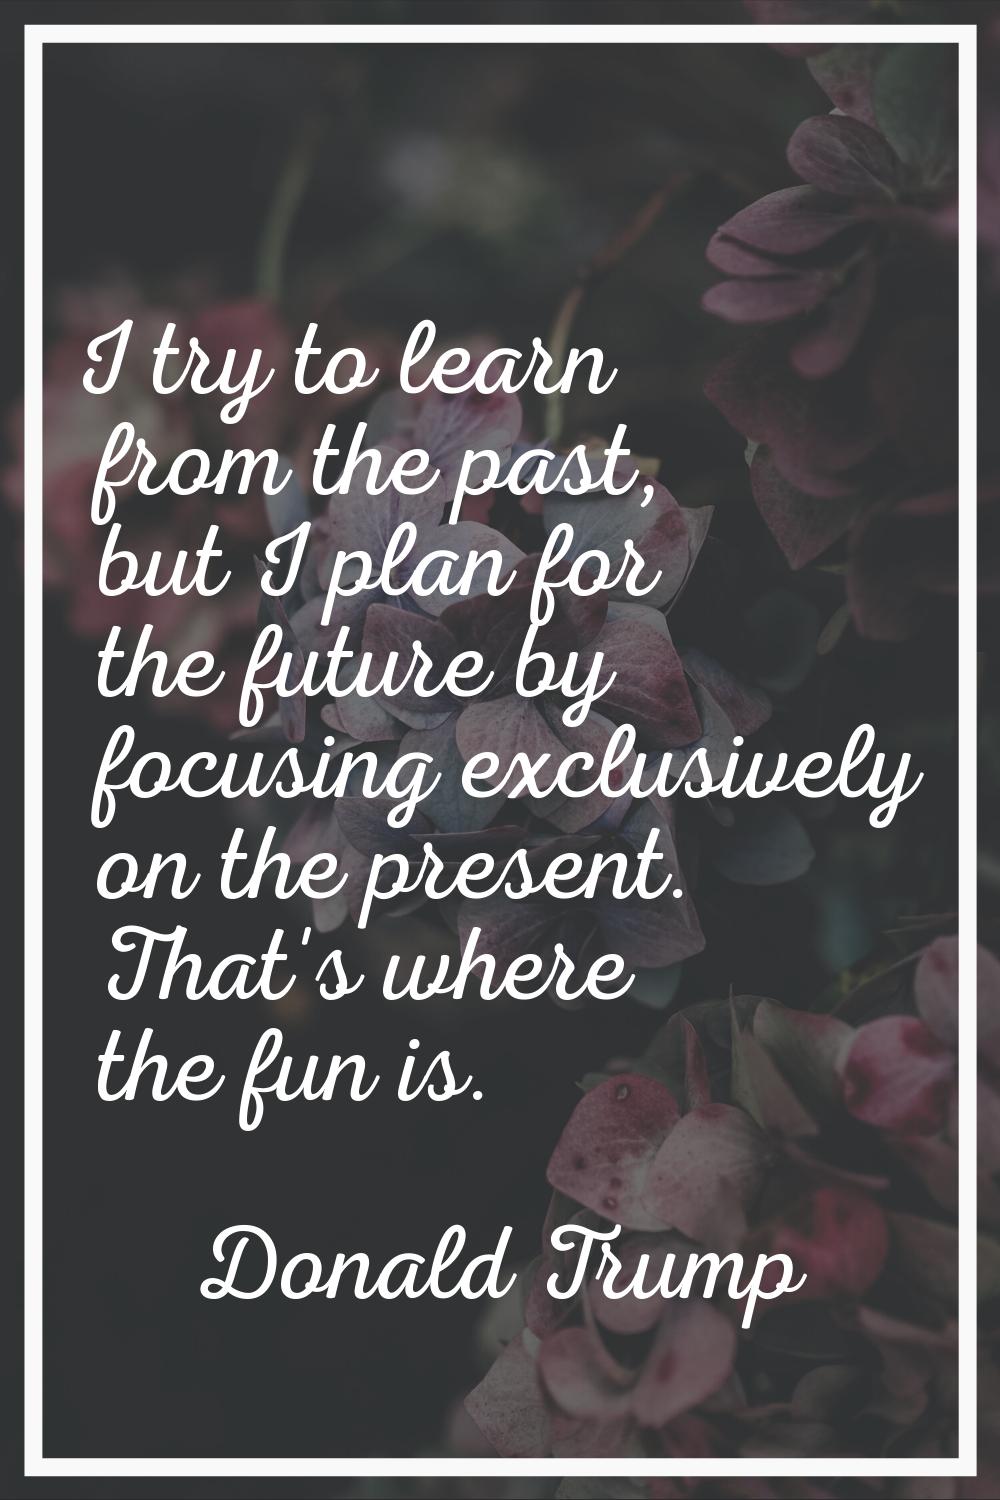 I try to learn from the past, but I plan for the future by focusing exclusively on the present. Tha